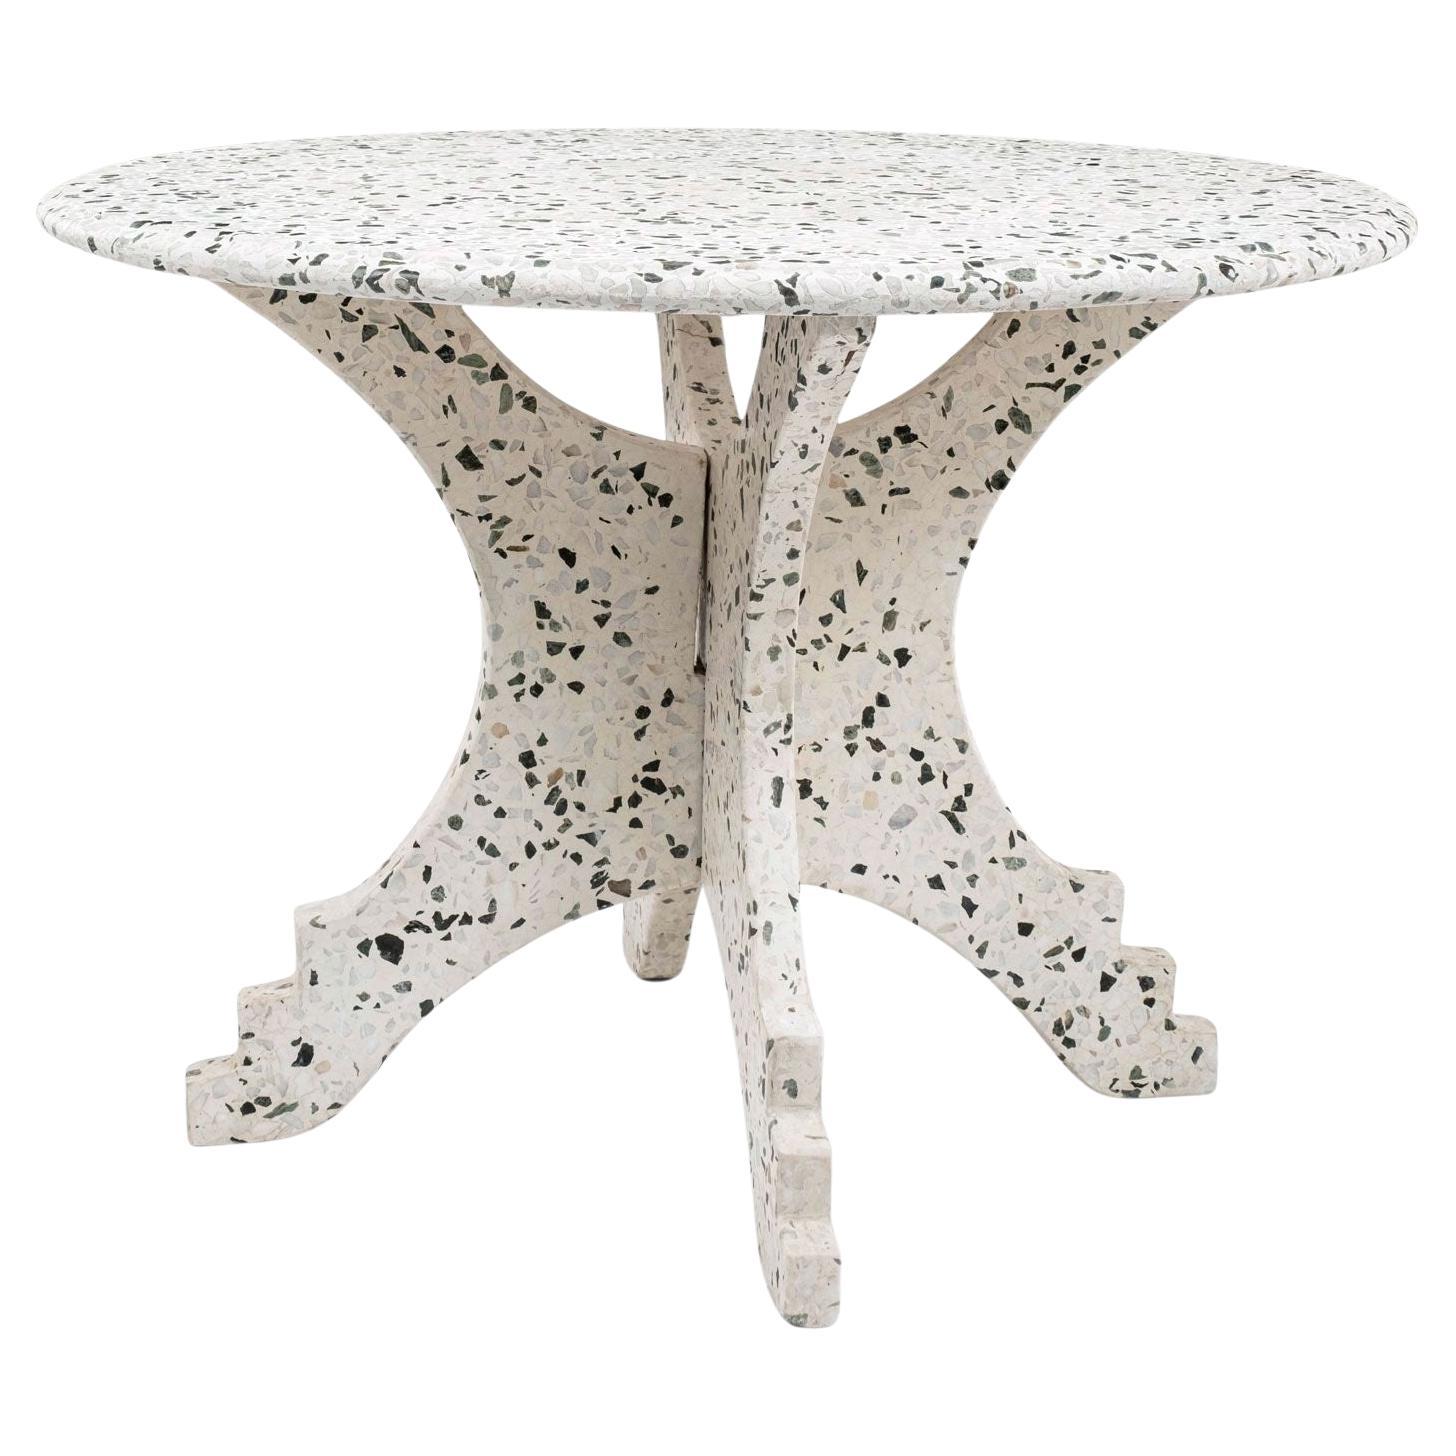 Large Round Vintage Blue and White Terrazzo Table For Sale